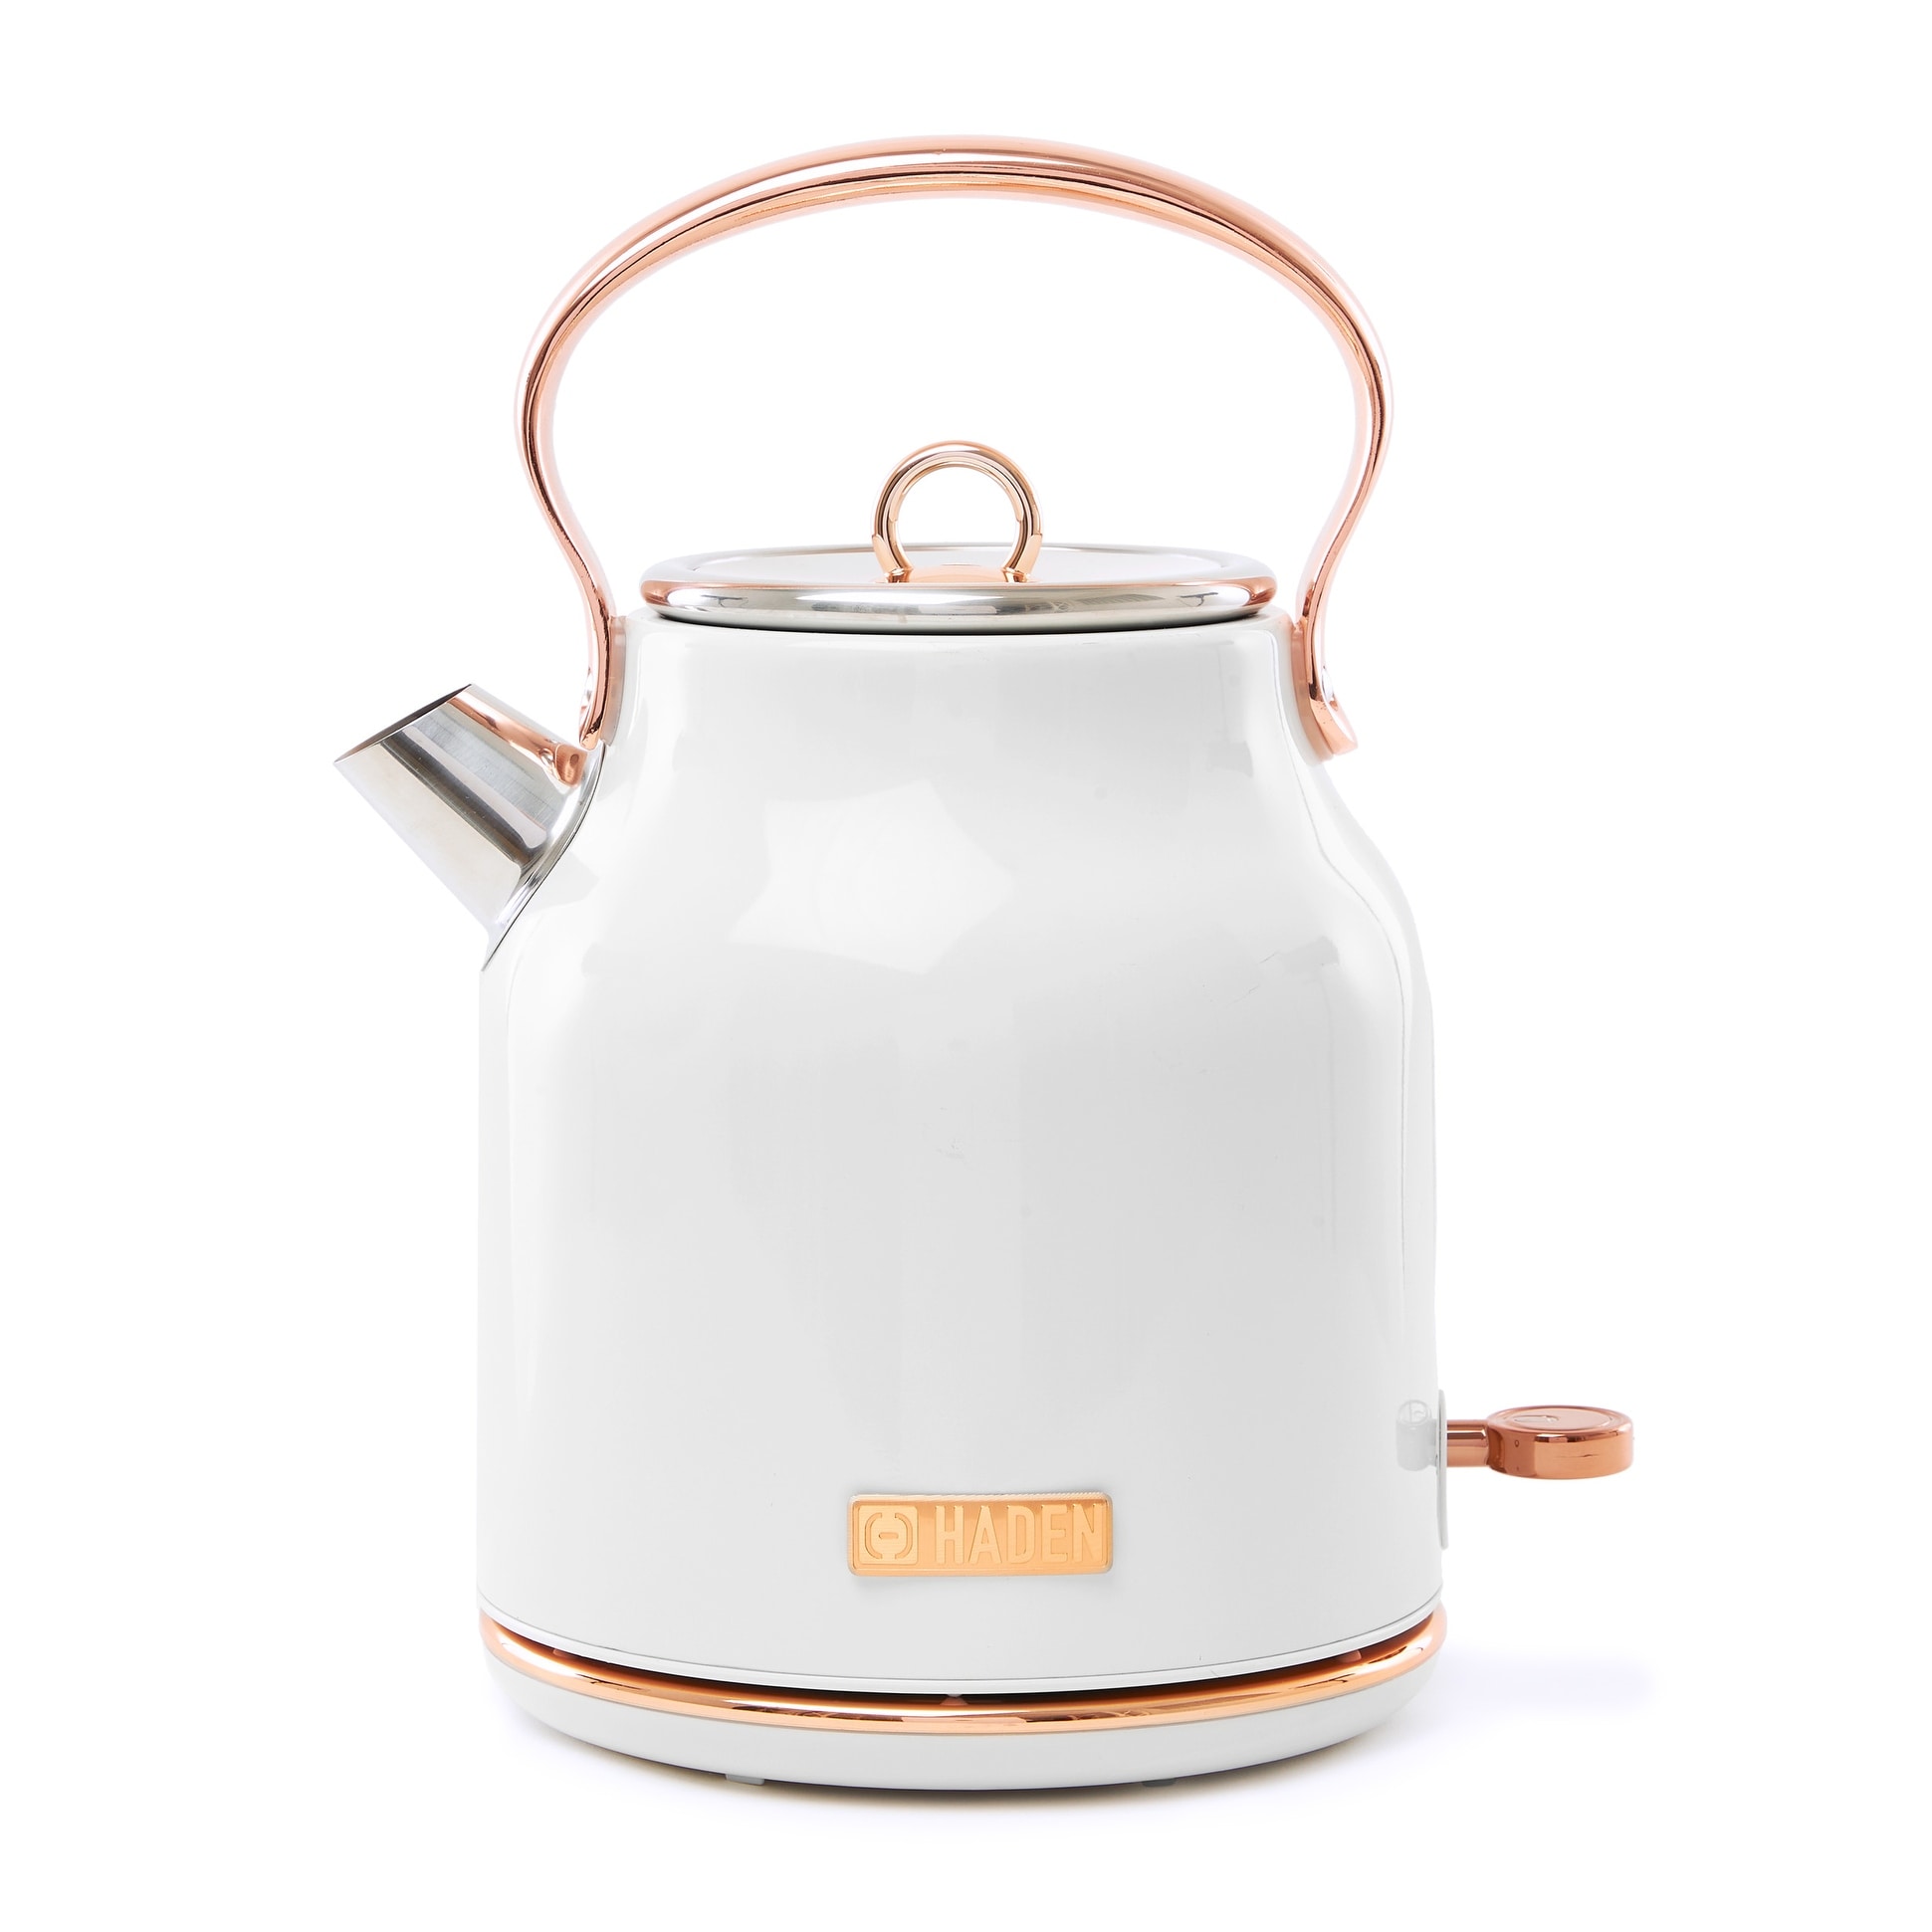 https://ak1.ostkcdn.com/images/products/is/images/direct/6eecae190703892fee34cbc829d04eede012d9a8/Haden-Heritage-1.7-Liter-Stainless-Steel-Electric-Tea-Kettle.jpg